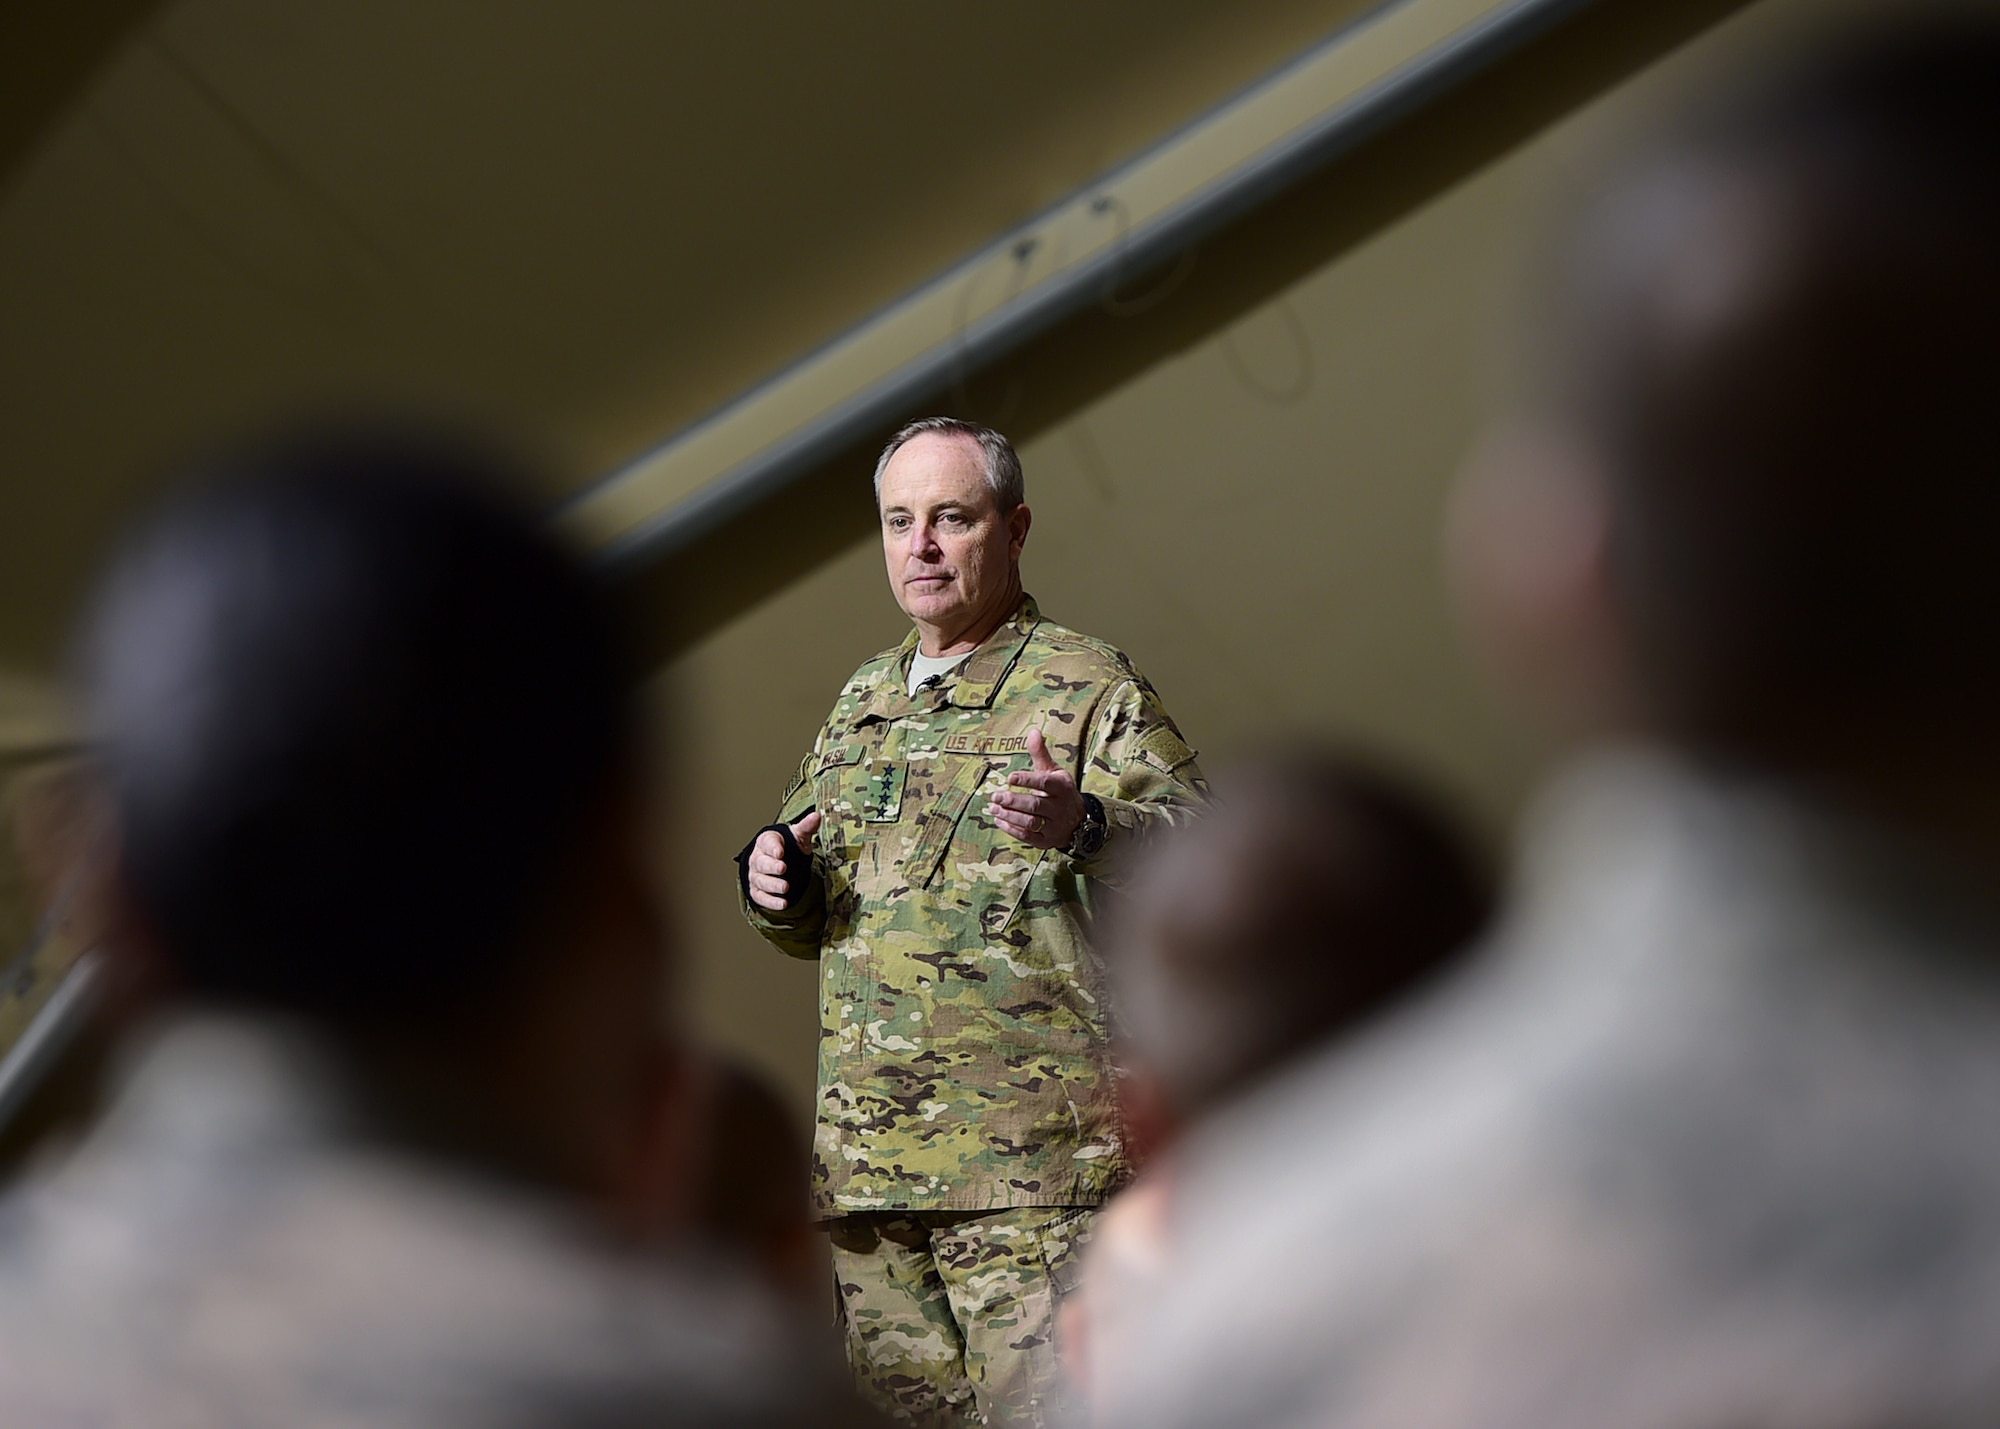 Air Force Chief of Staff Gen. Mark A Welsh III speaks to Airmen currently deployed to the 332nd Air Expeditionary Wing at an undisclosed location in Southwest Asia, Dec. 10, 2015. Welsh and Chief Master Sgt. of the Air Force James A. Cody visited the base to express their gratitude and thanks for the Airmen’s hard work, dedication and sacrifices made in support of Operation INHERENT RESOLVE. (U.S. Air Force photo by Staff Sgt. Jerilyn Quintanilla) 